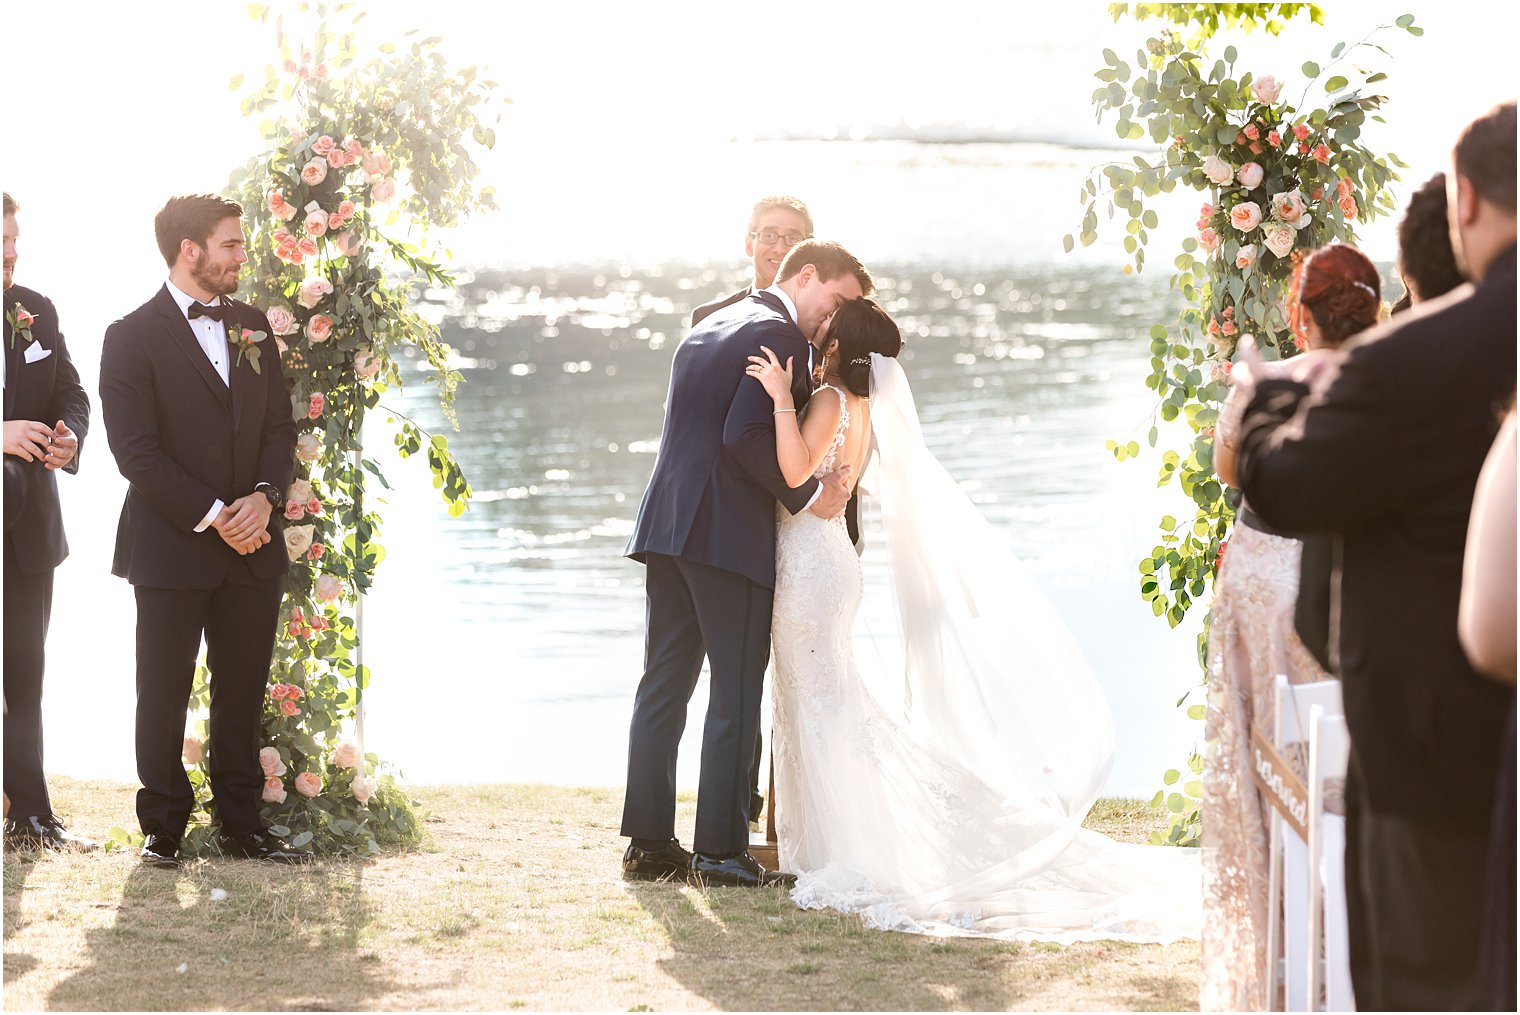 bride and groom kiss between floral arches in outdoor wedding ceremony by water in Franklin Lakes NJ